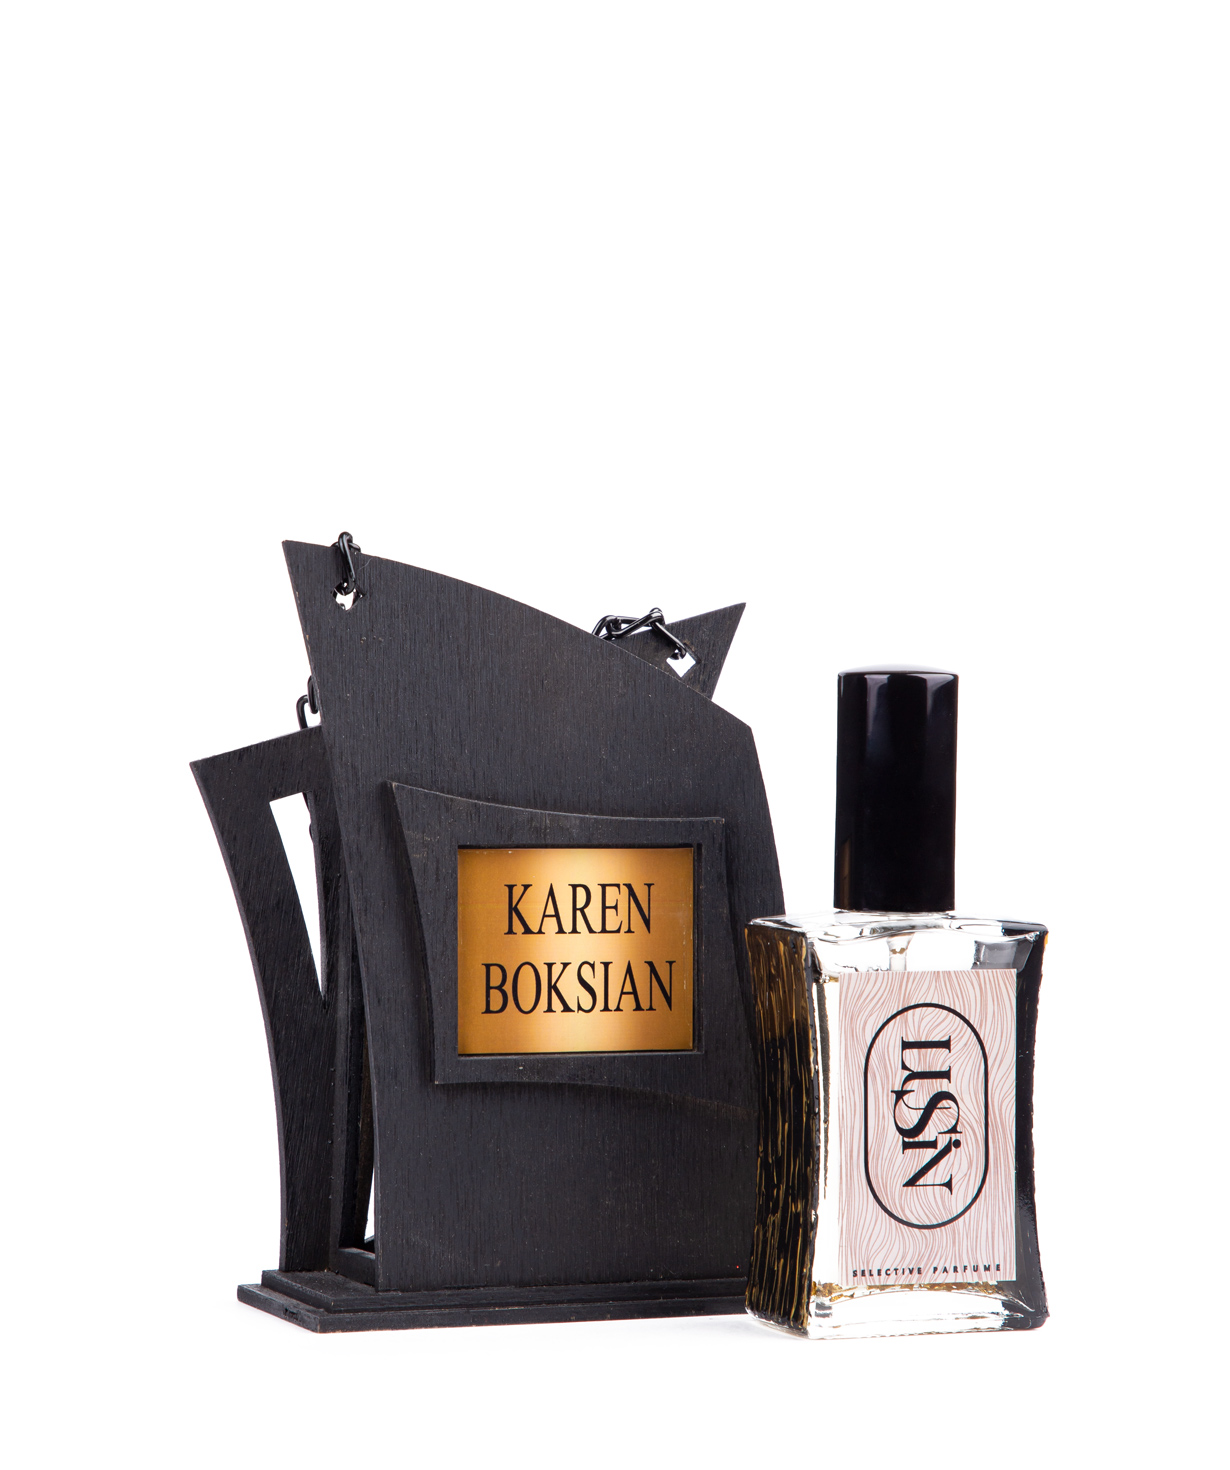 Perfume ''Lusin parfume'' with your name / surname